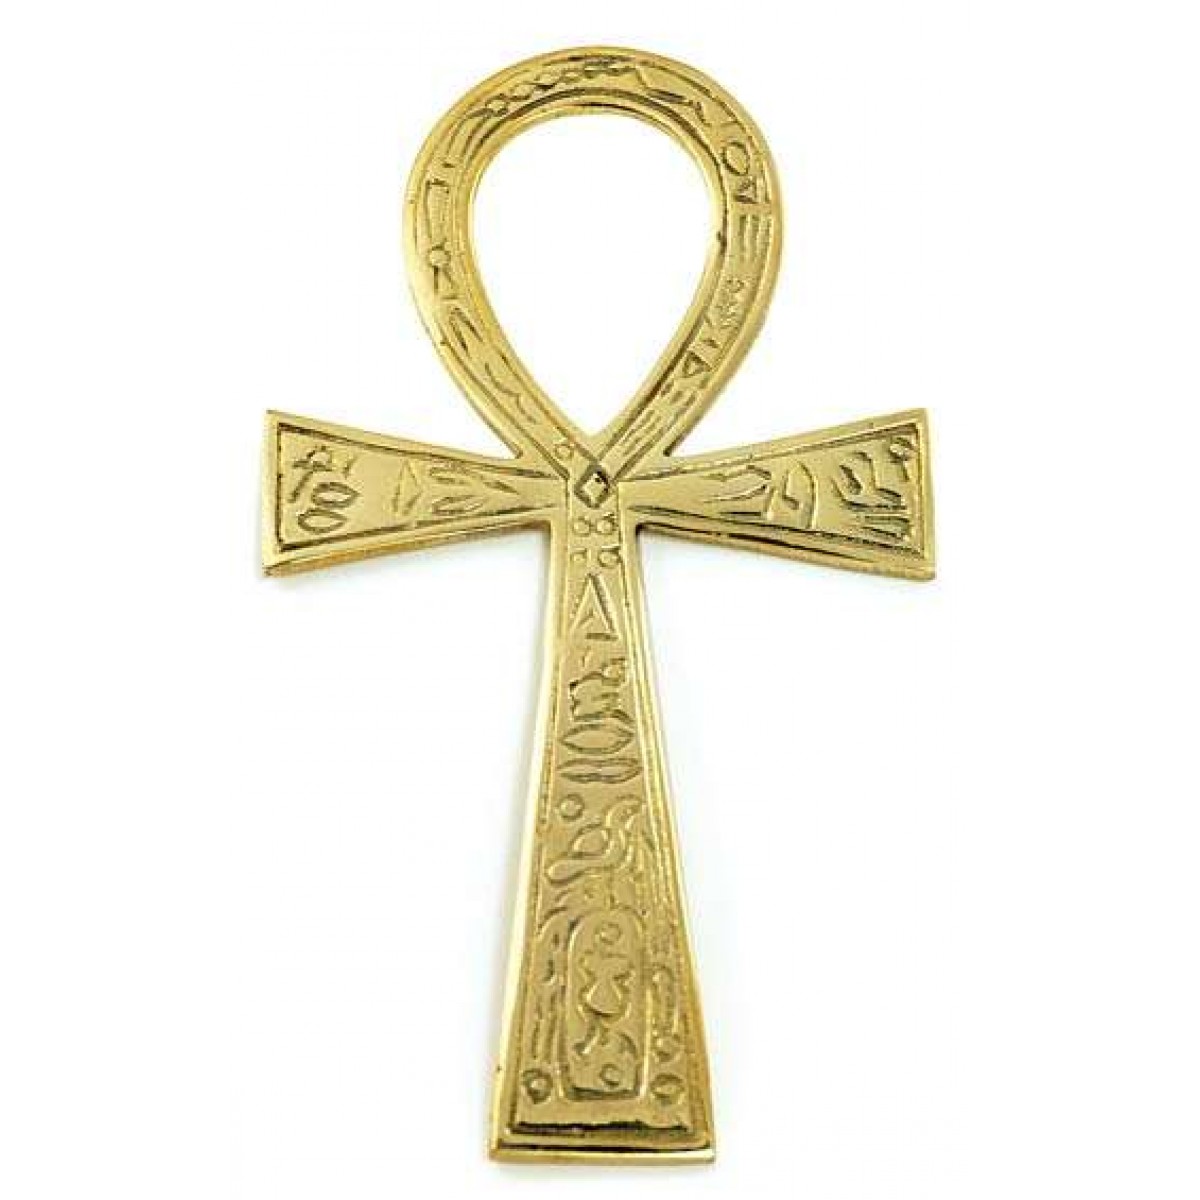 Large Brass Engraved Egyptian Ankh 3.5 x 6.5 Inches - Double Sided